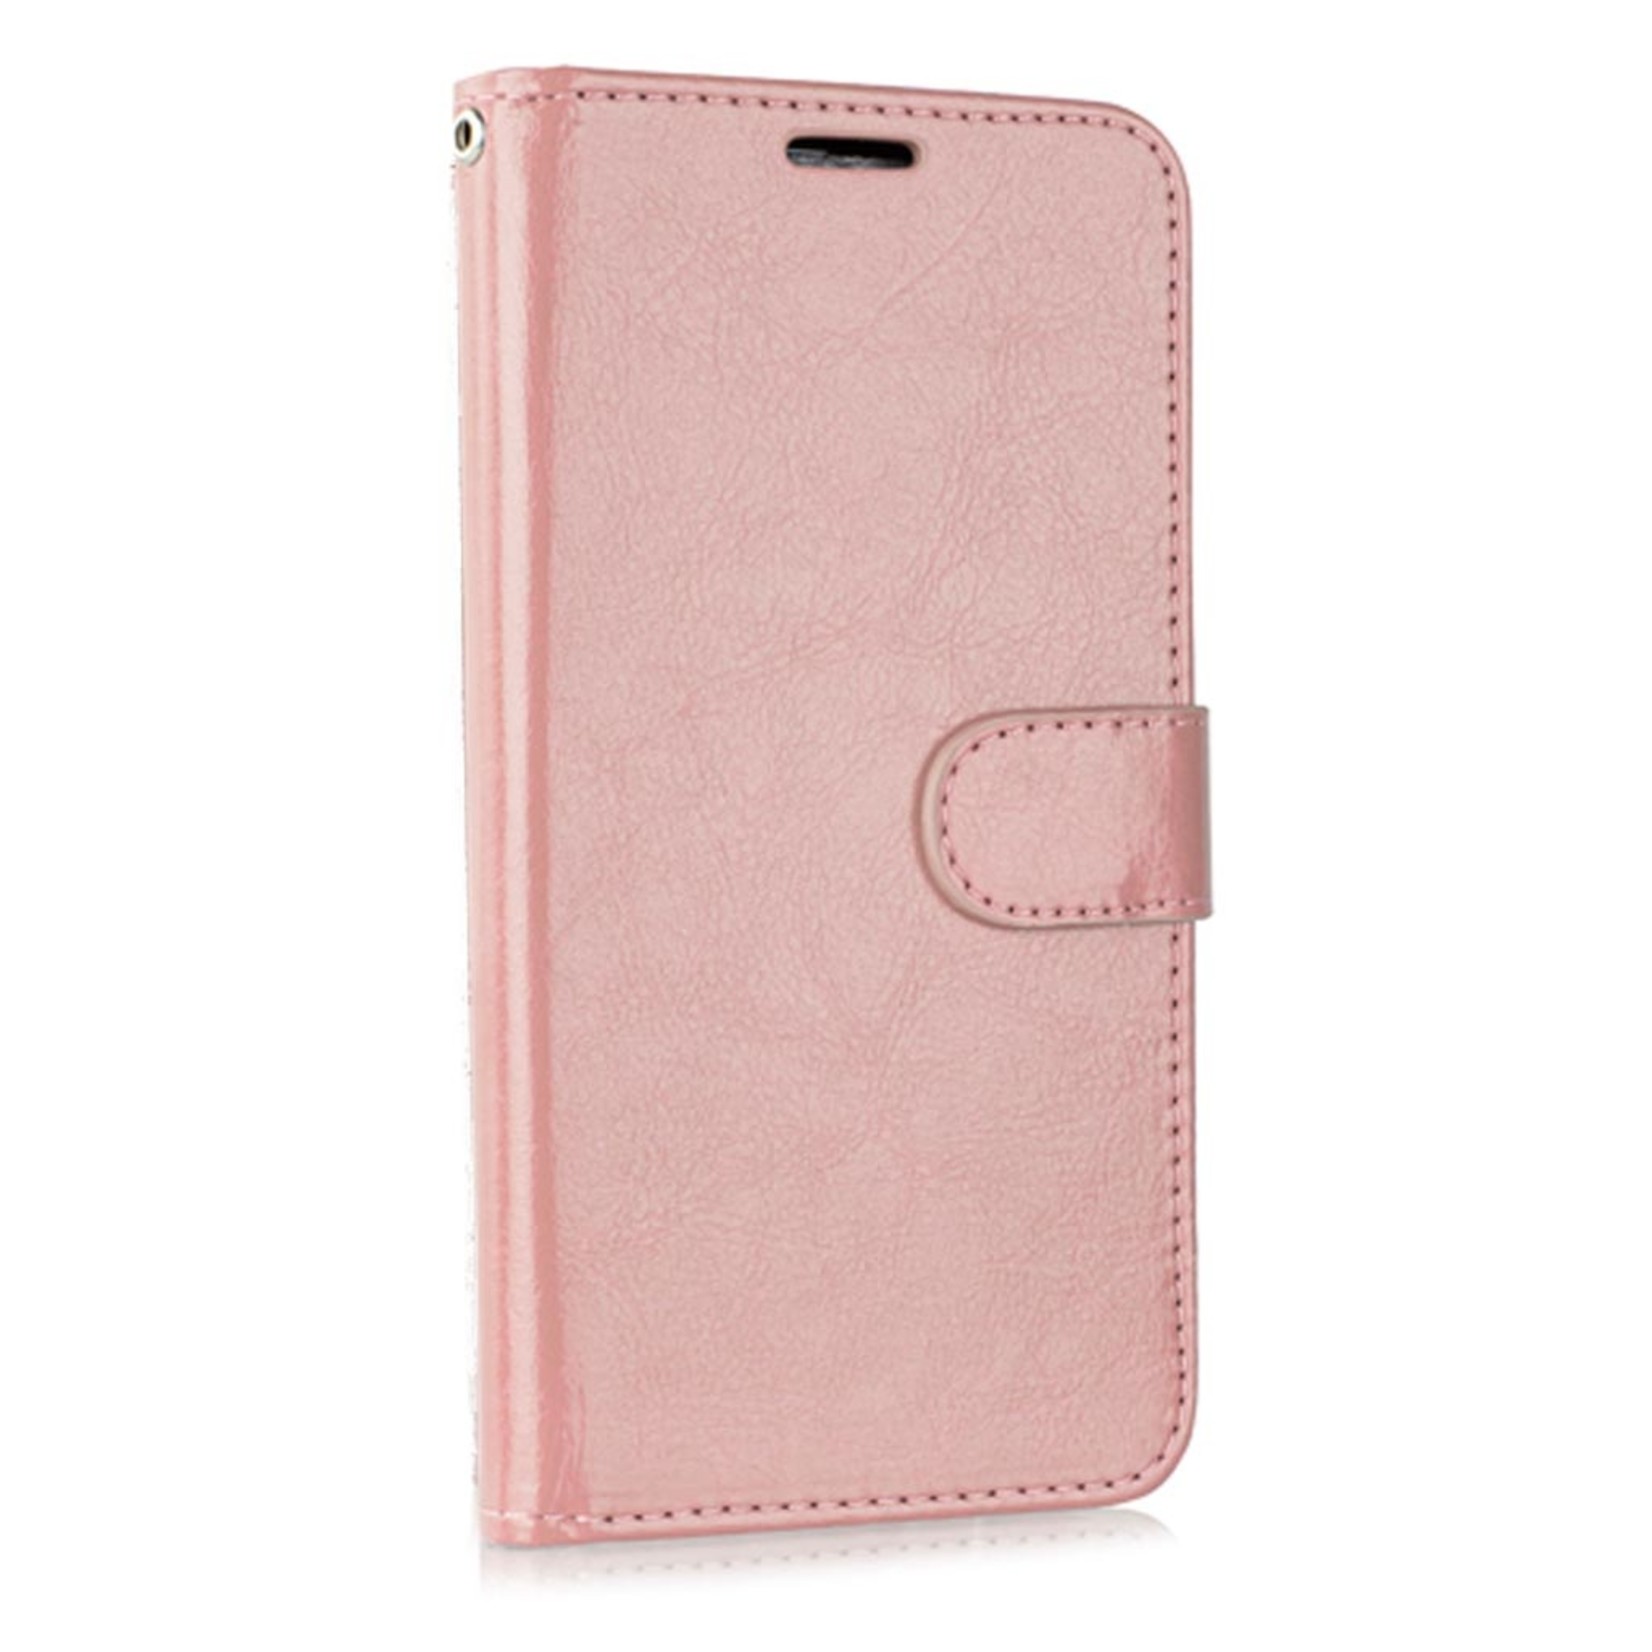 Hybrid PU Leather Flip Cover Case Wallet with Credit Card Slots for Galaxy A12